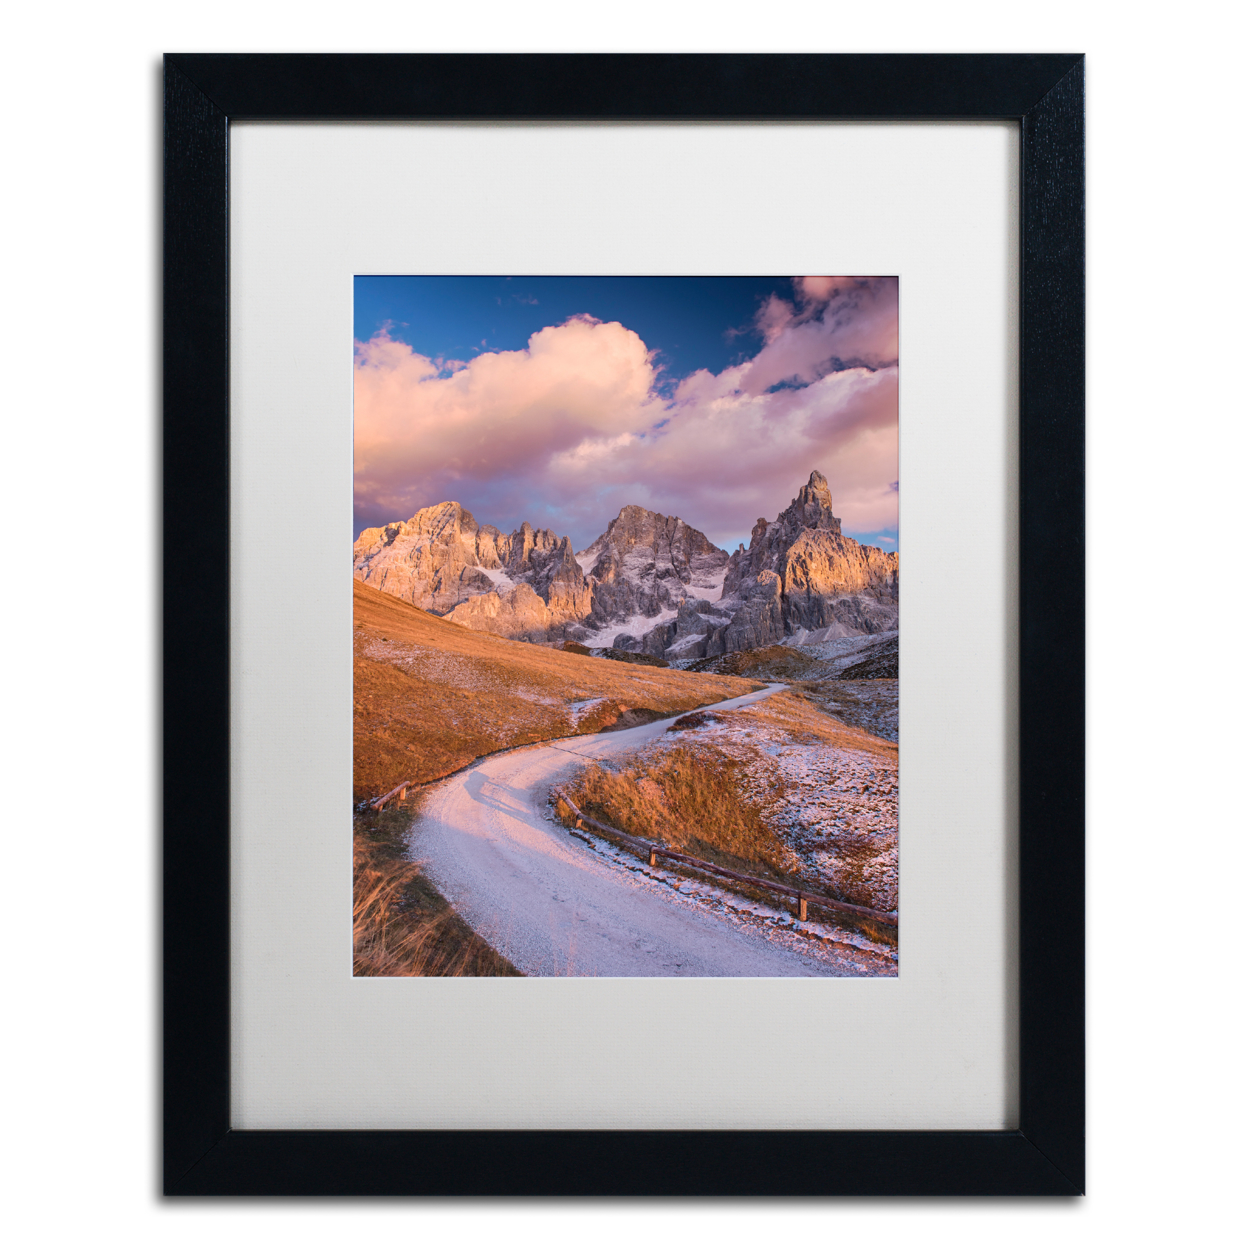 Michael Blanchette Photography 'The High Road' Black Wooden Framed Art 18 X 22 Inches